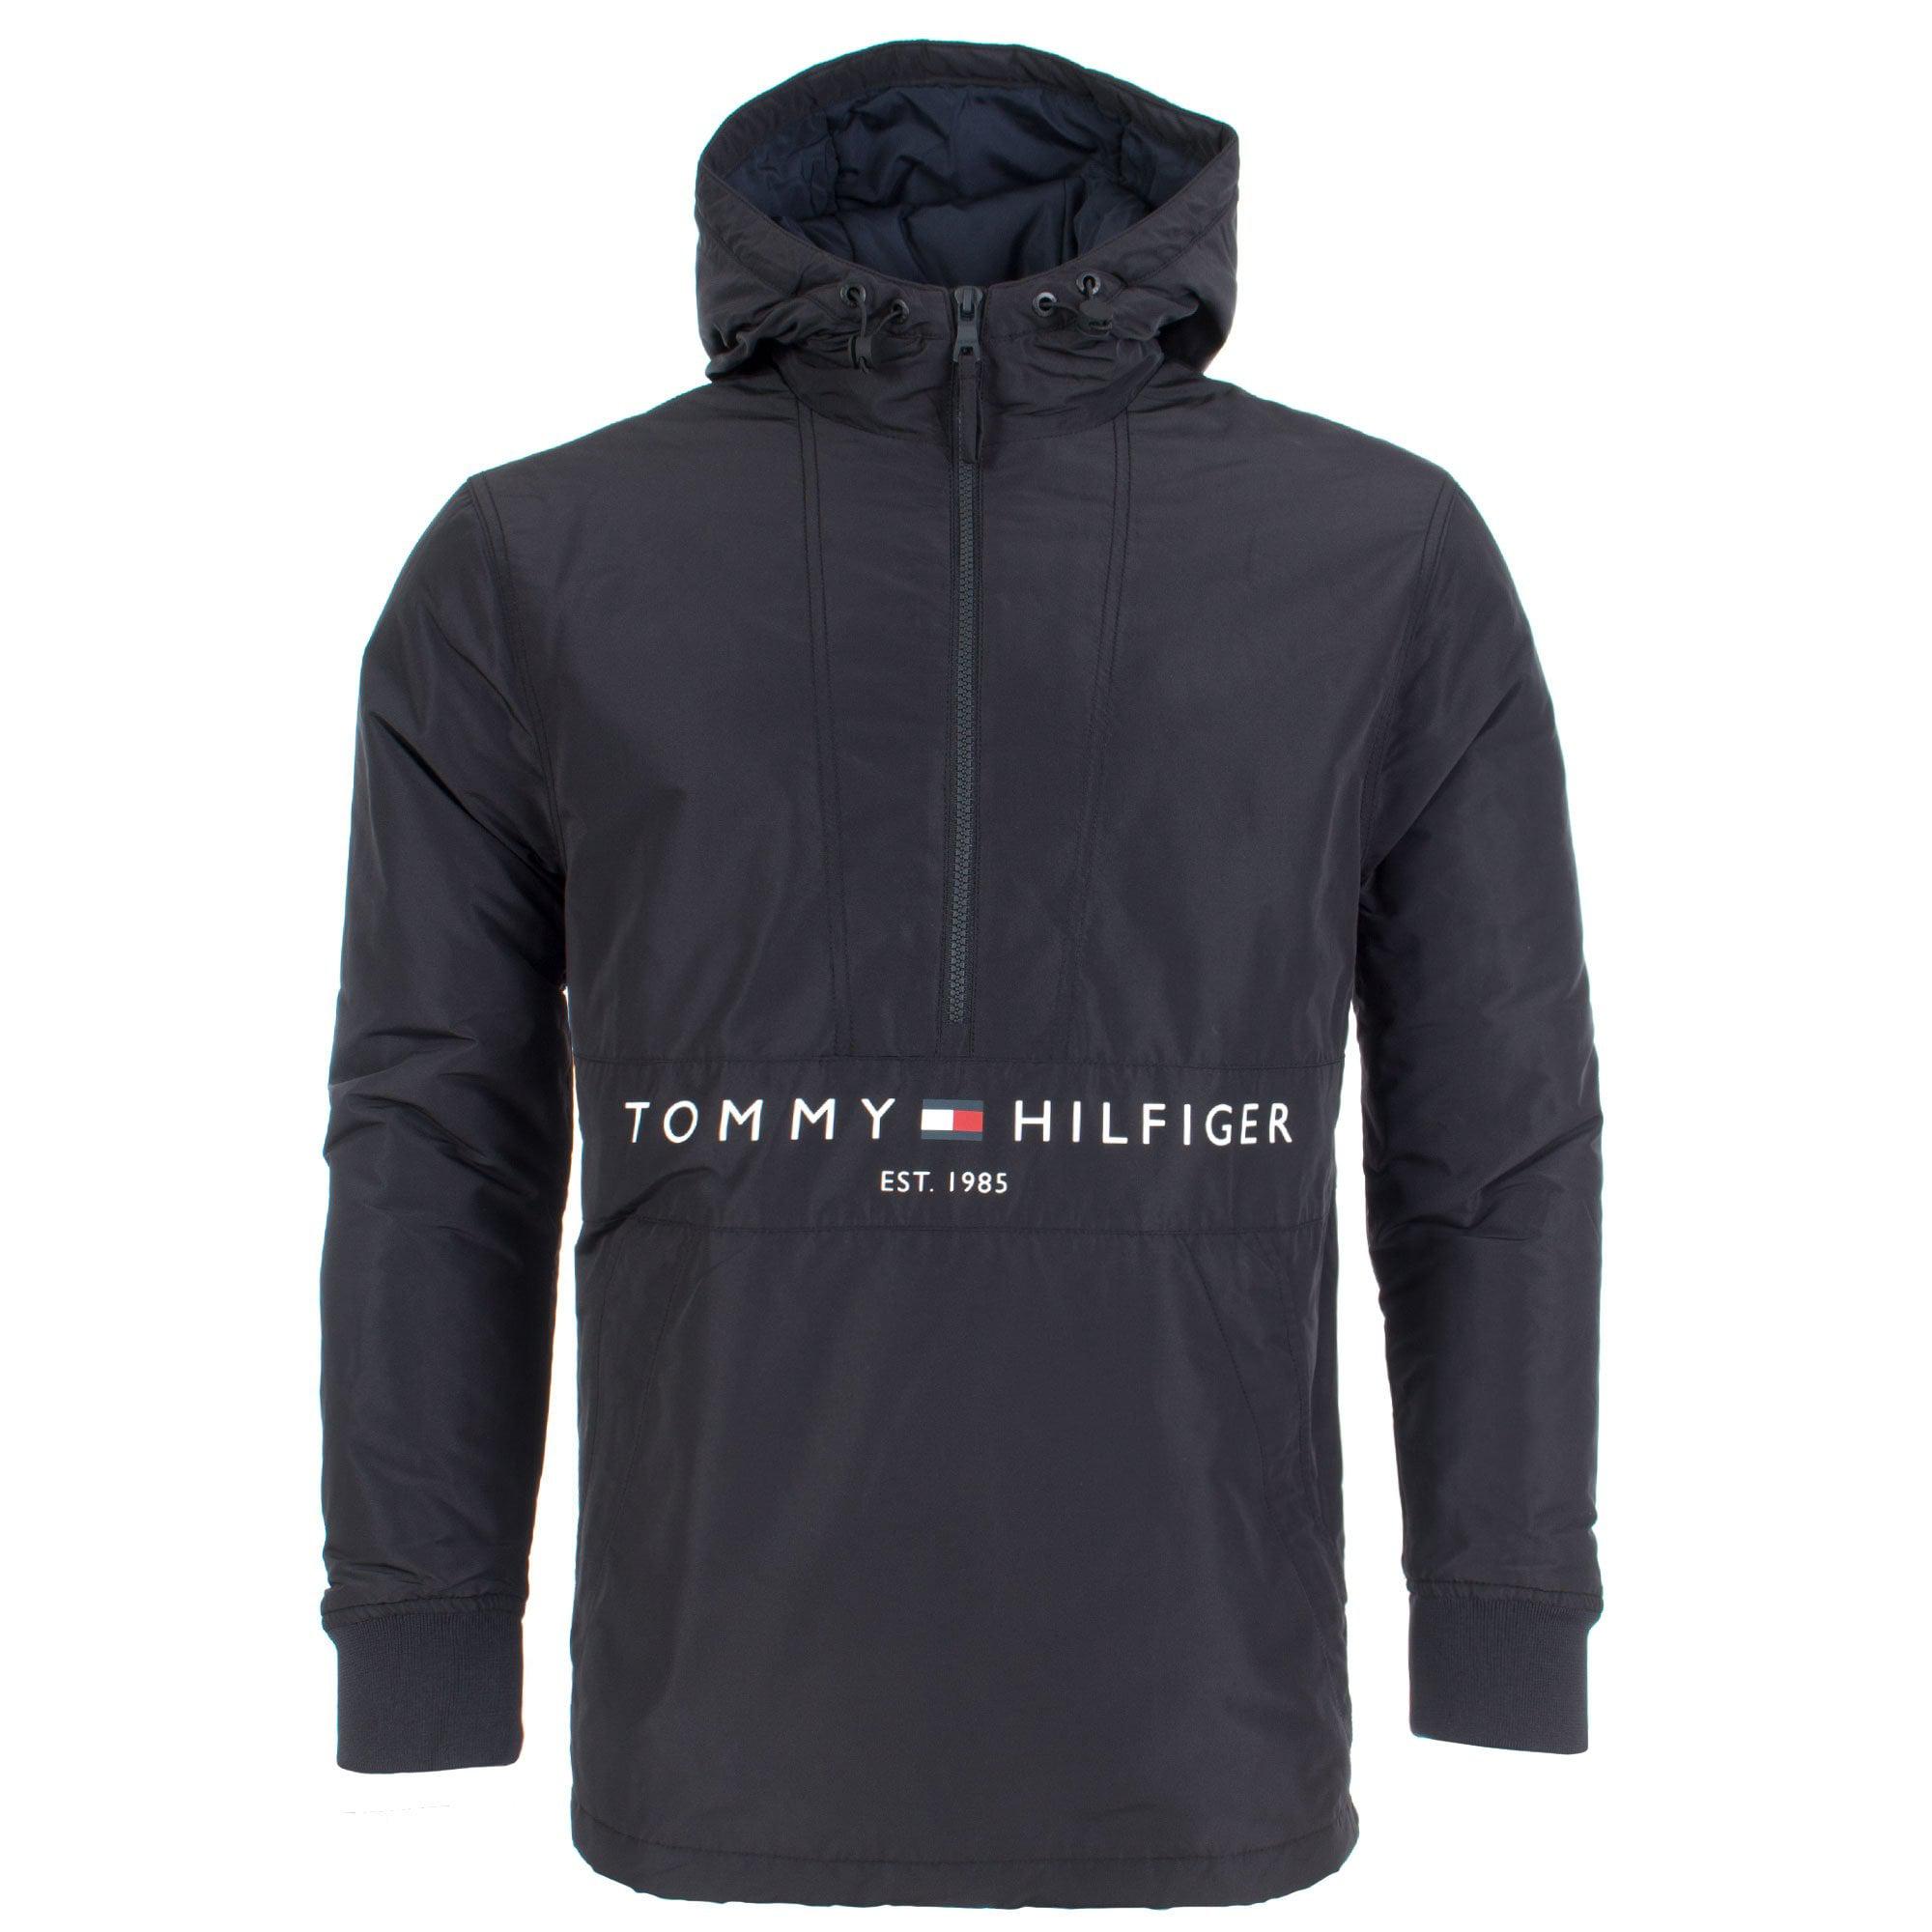 Tommy Hilfiger Padded Anorak Sale, SAVE 55% - aveclumiere.com